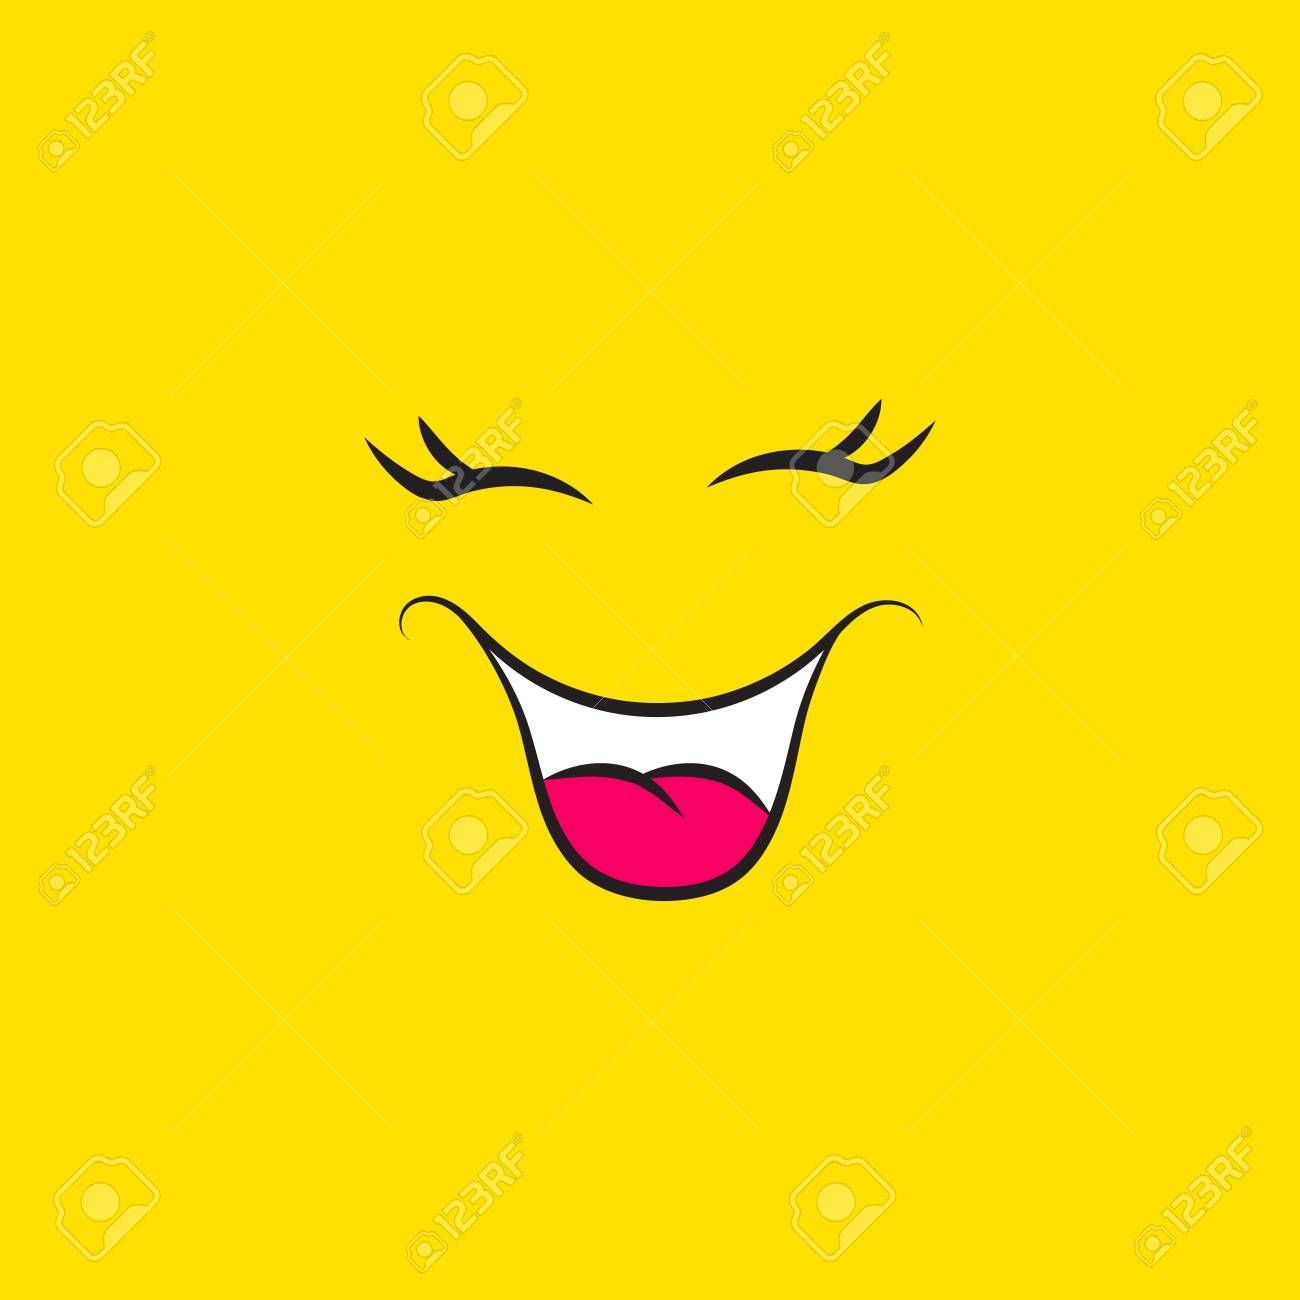 Free download Funny Smiley Face Icon On Yellow Background Laughing